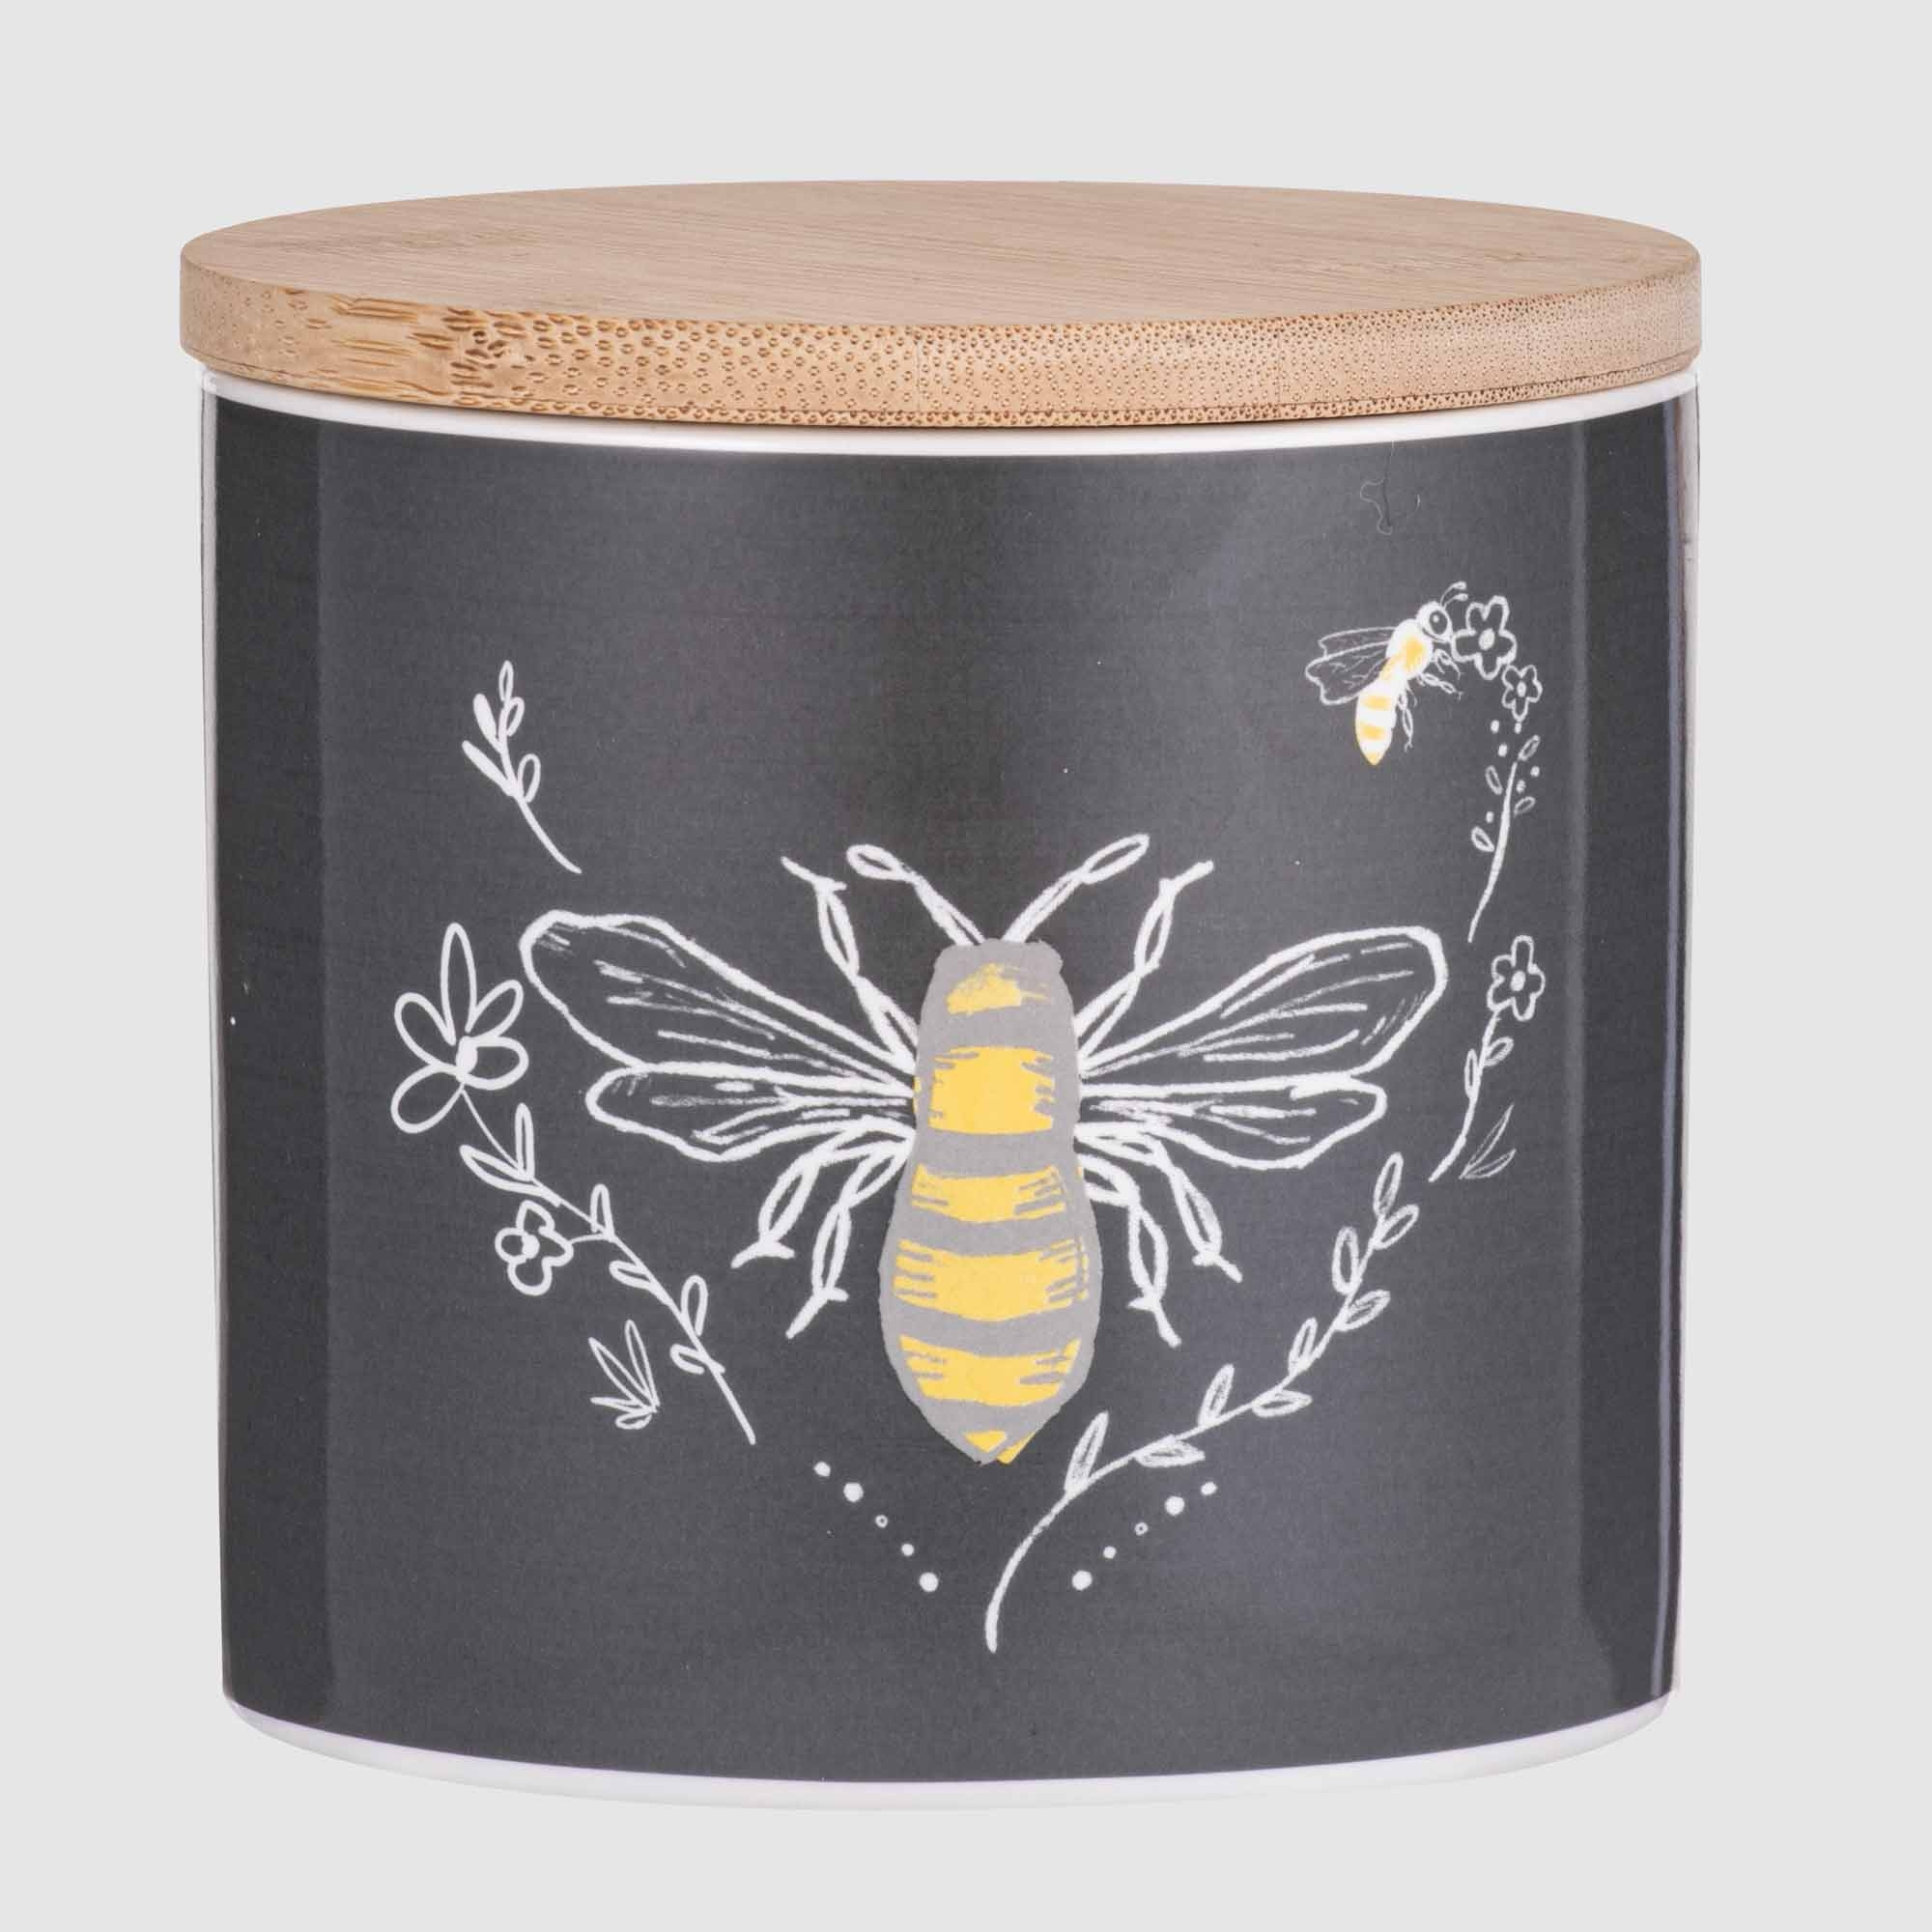 Just Home Bees Ceramic Canister